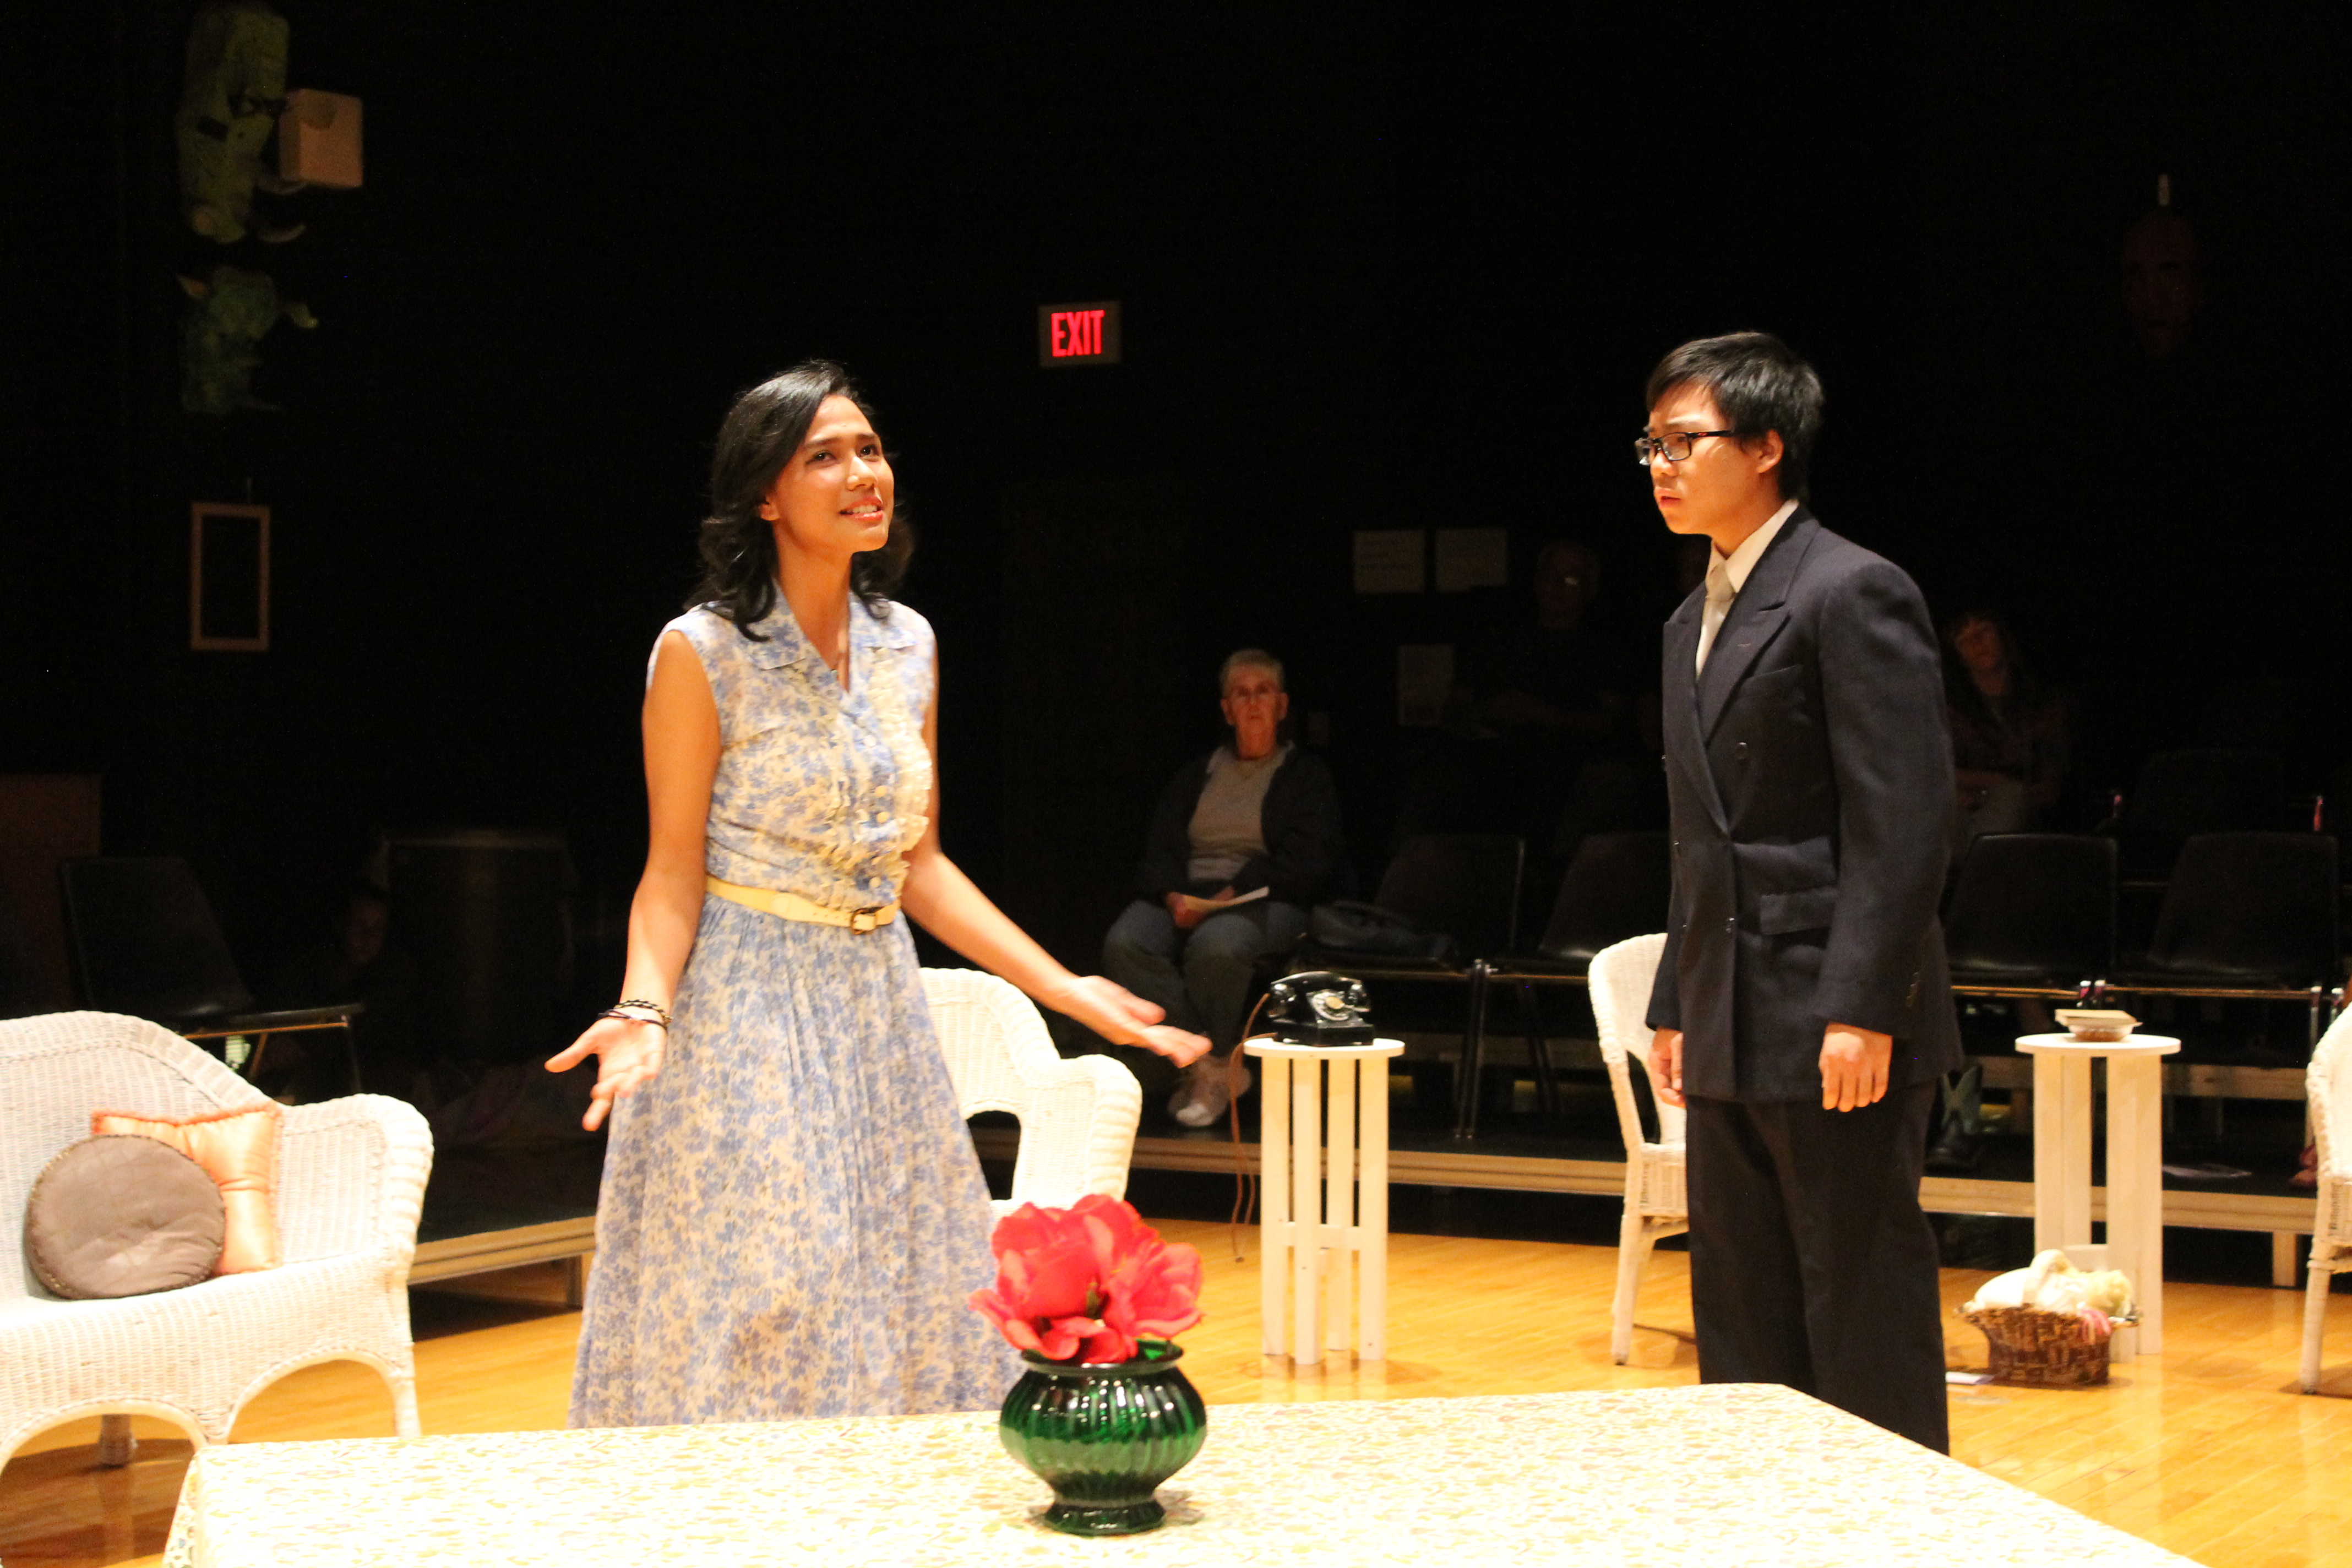 Junior Nadya Dicky and Senior Mike Nguyen on opening night during their dramatic final scene .